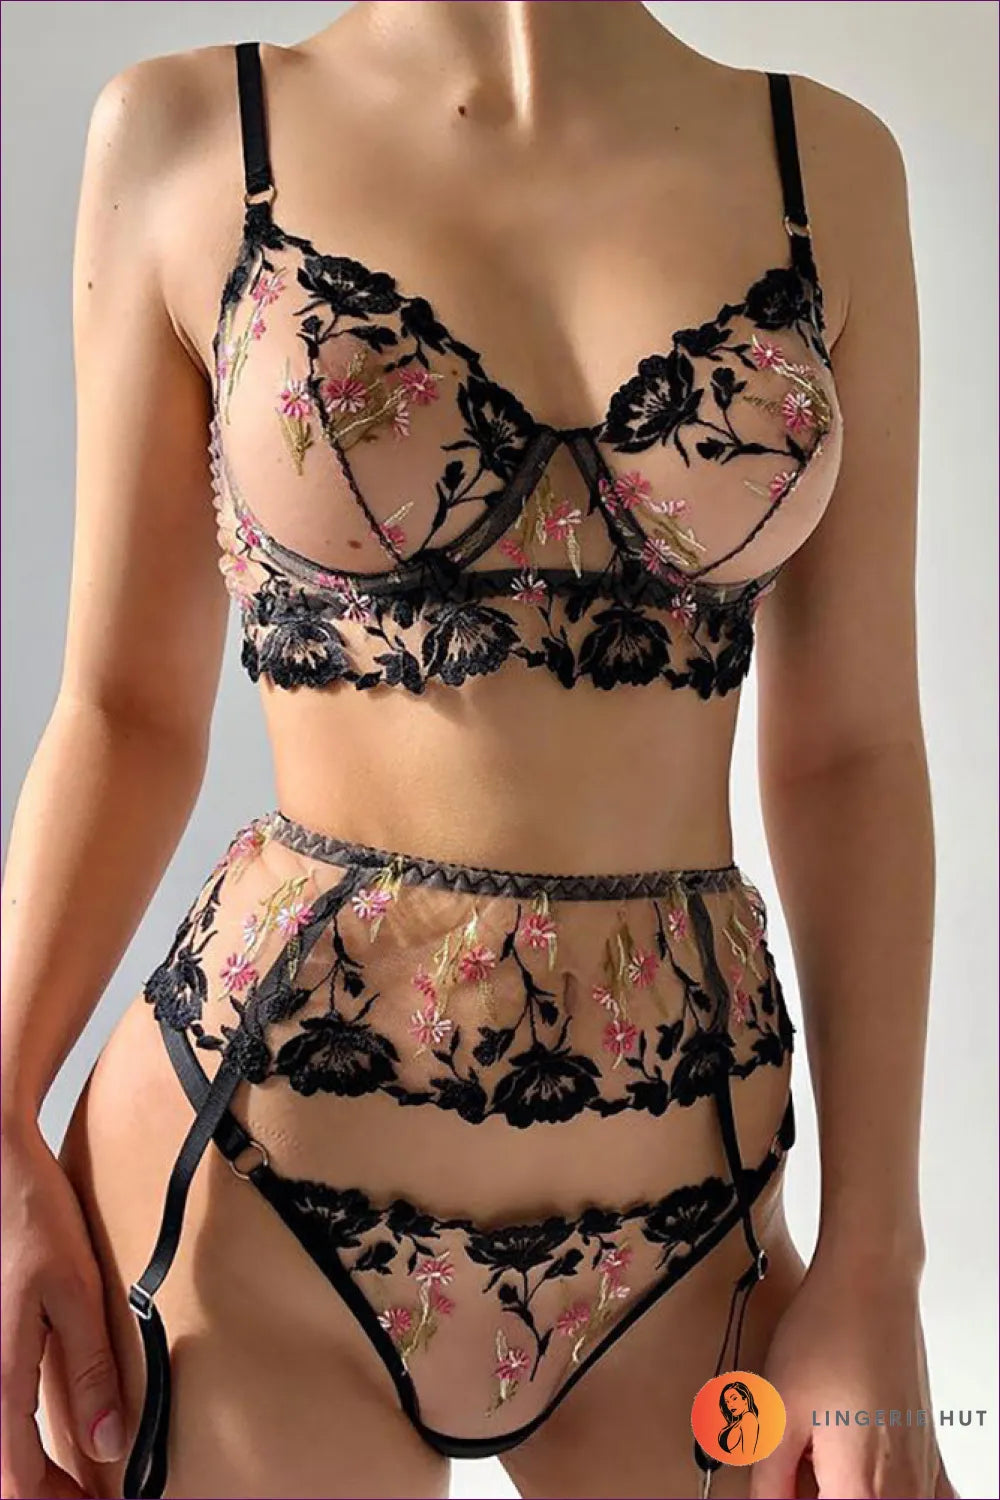 Elevate The Romance With This Exquisite Lace Set! Embrace Beauty And Confidence In Soft Floral Lace, Long Line